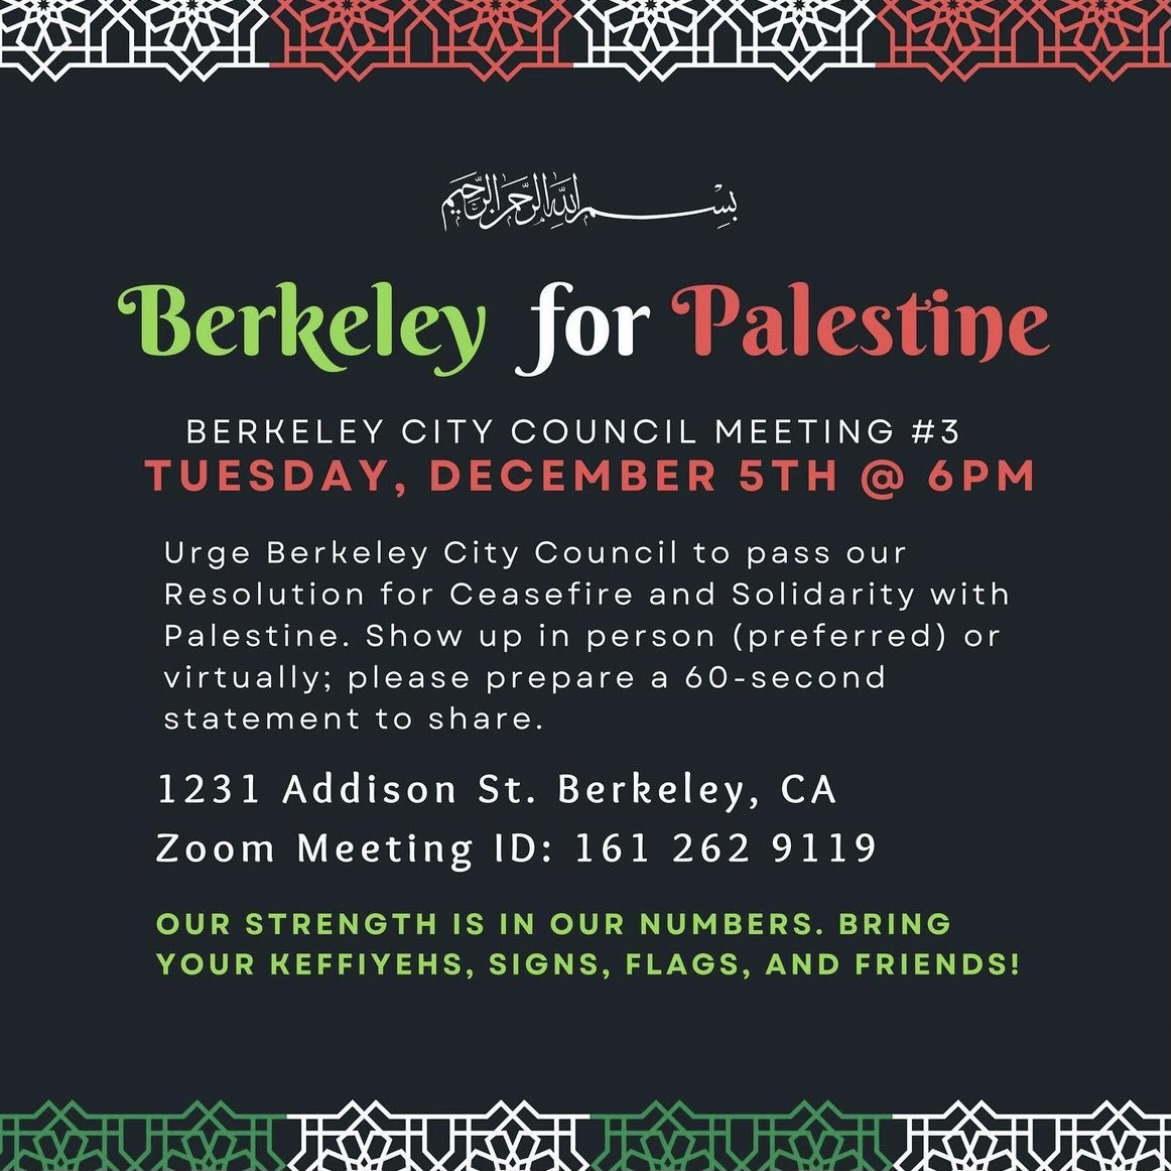 From @/yallaberkeley_palestinelove on IG: URGENT call to action! The Berkeley City Council must pass a resolution calling for a ceasefire in Palestine! Call and email your representatives & join us tomorrow, 12/05 at 6pm either online or in person to make your voice heard🍉